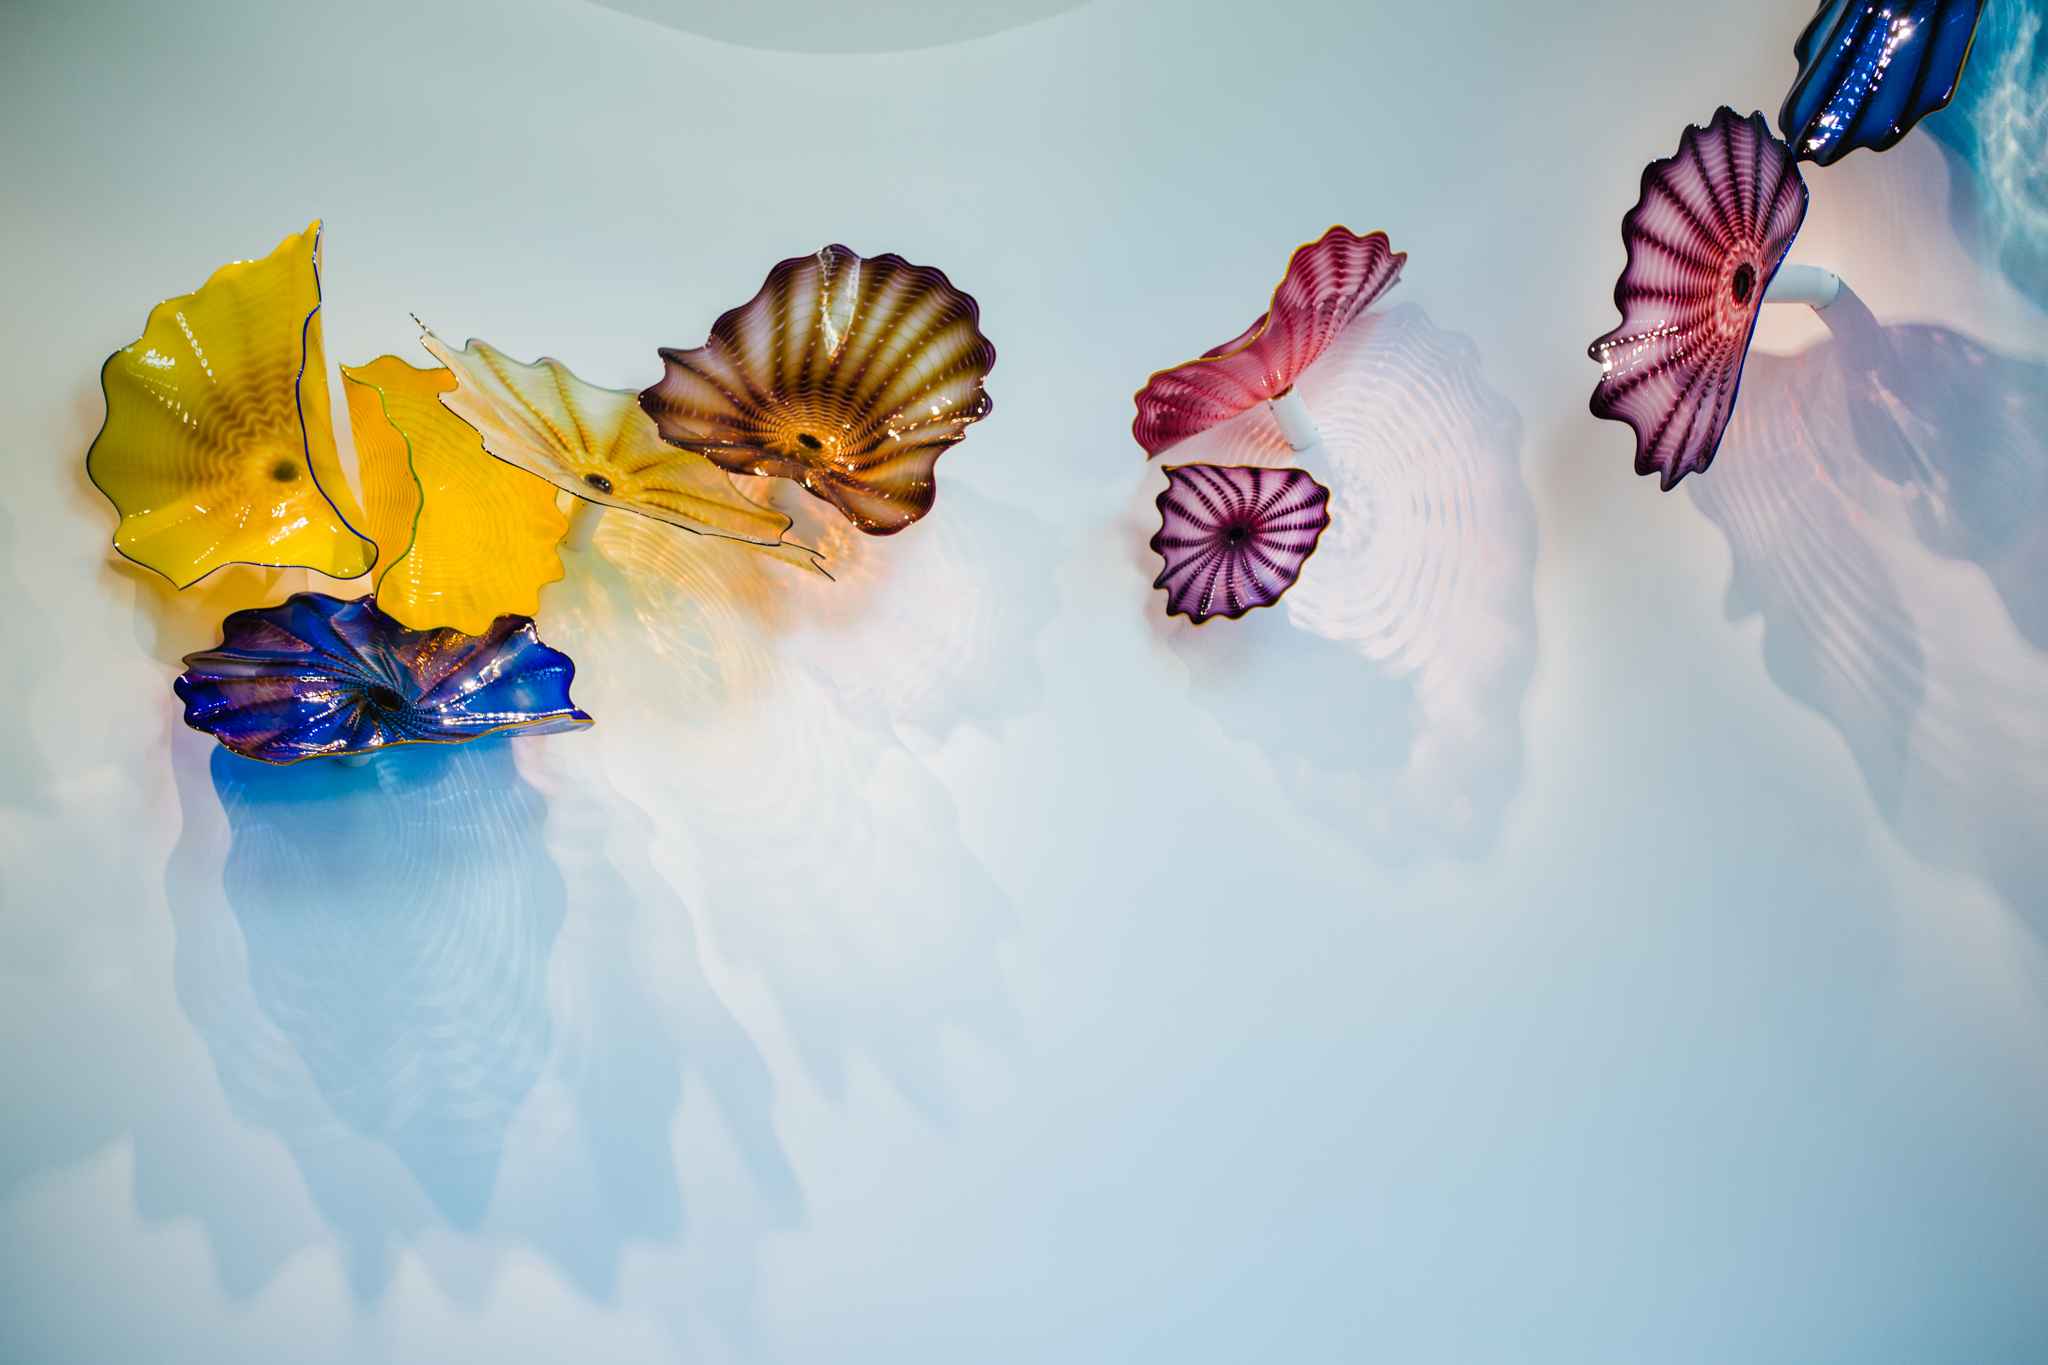 Chihuly at the Crocker Art Museum